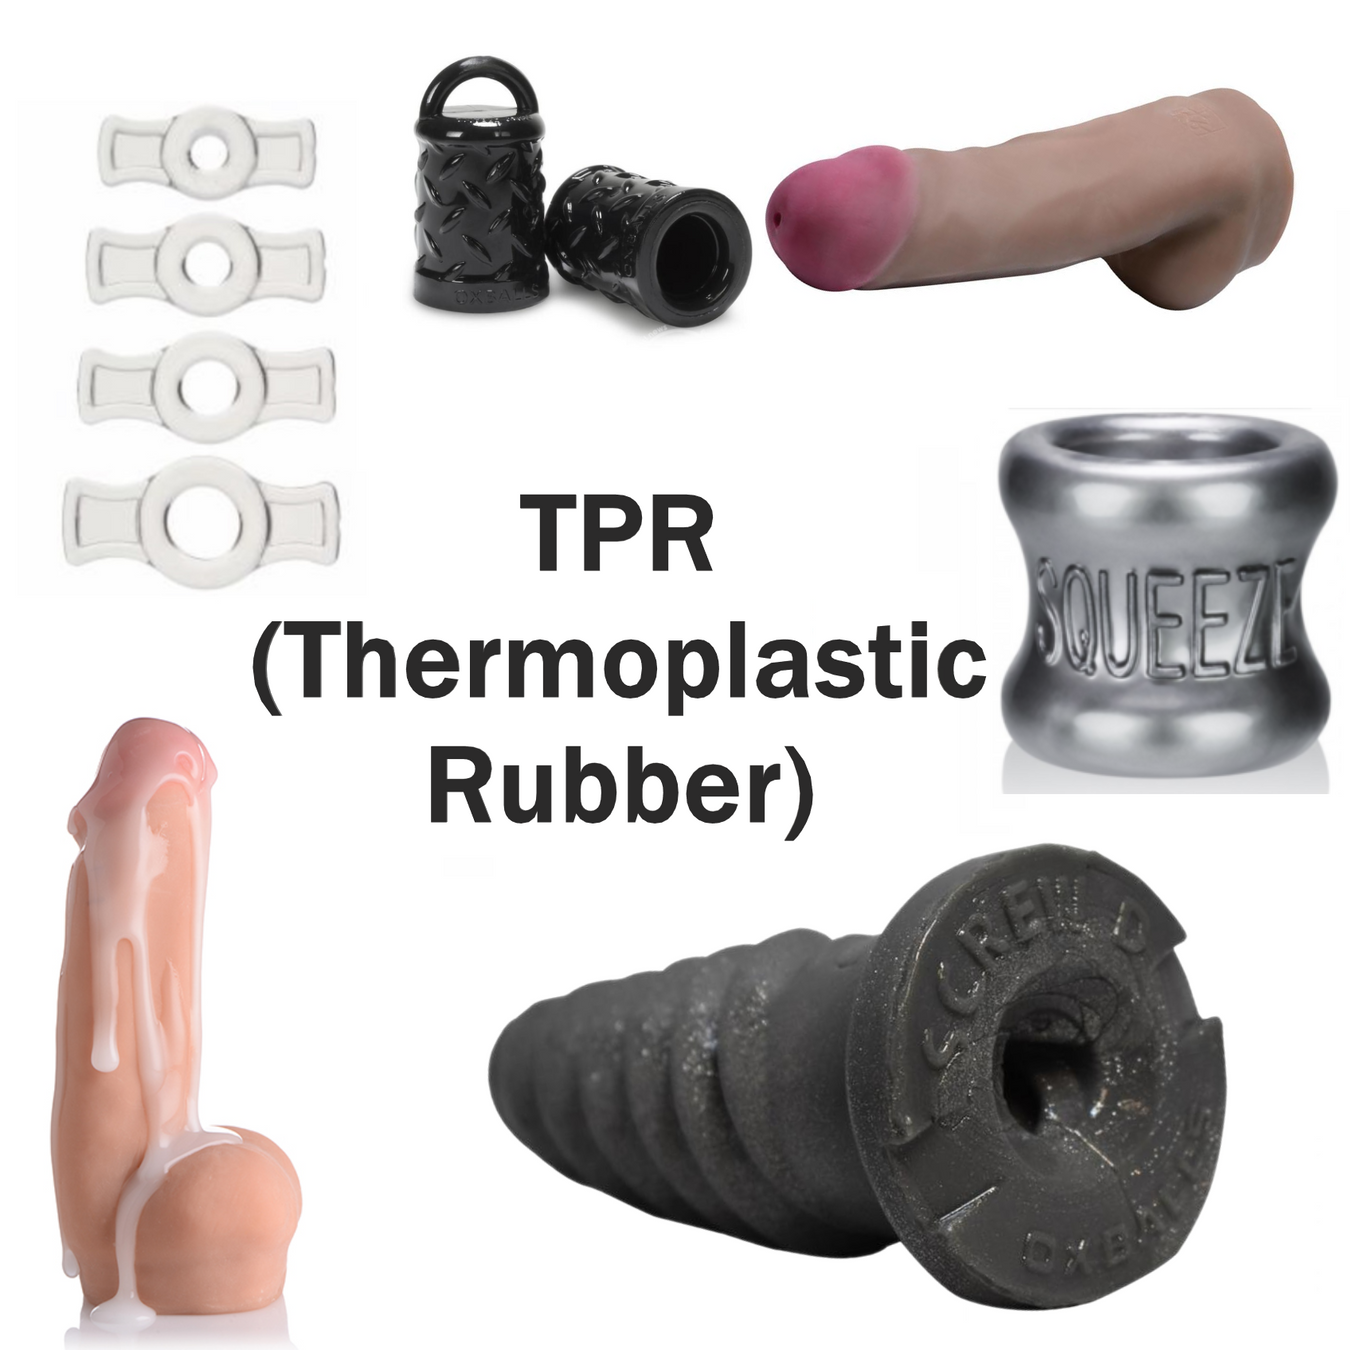 TPR - Thermoplastic Rubber